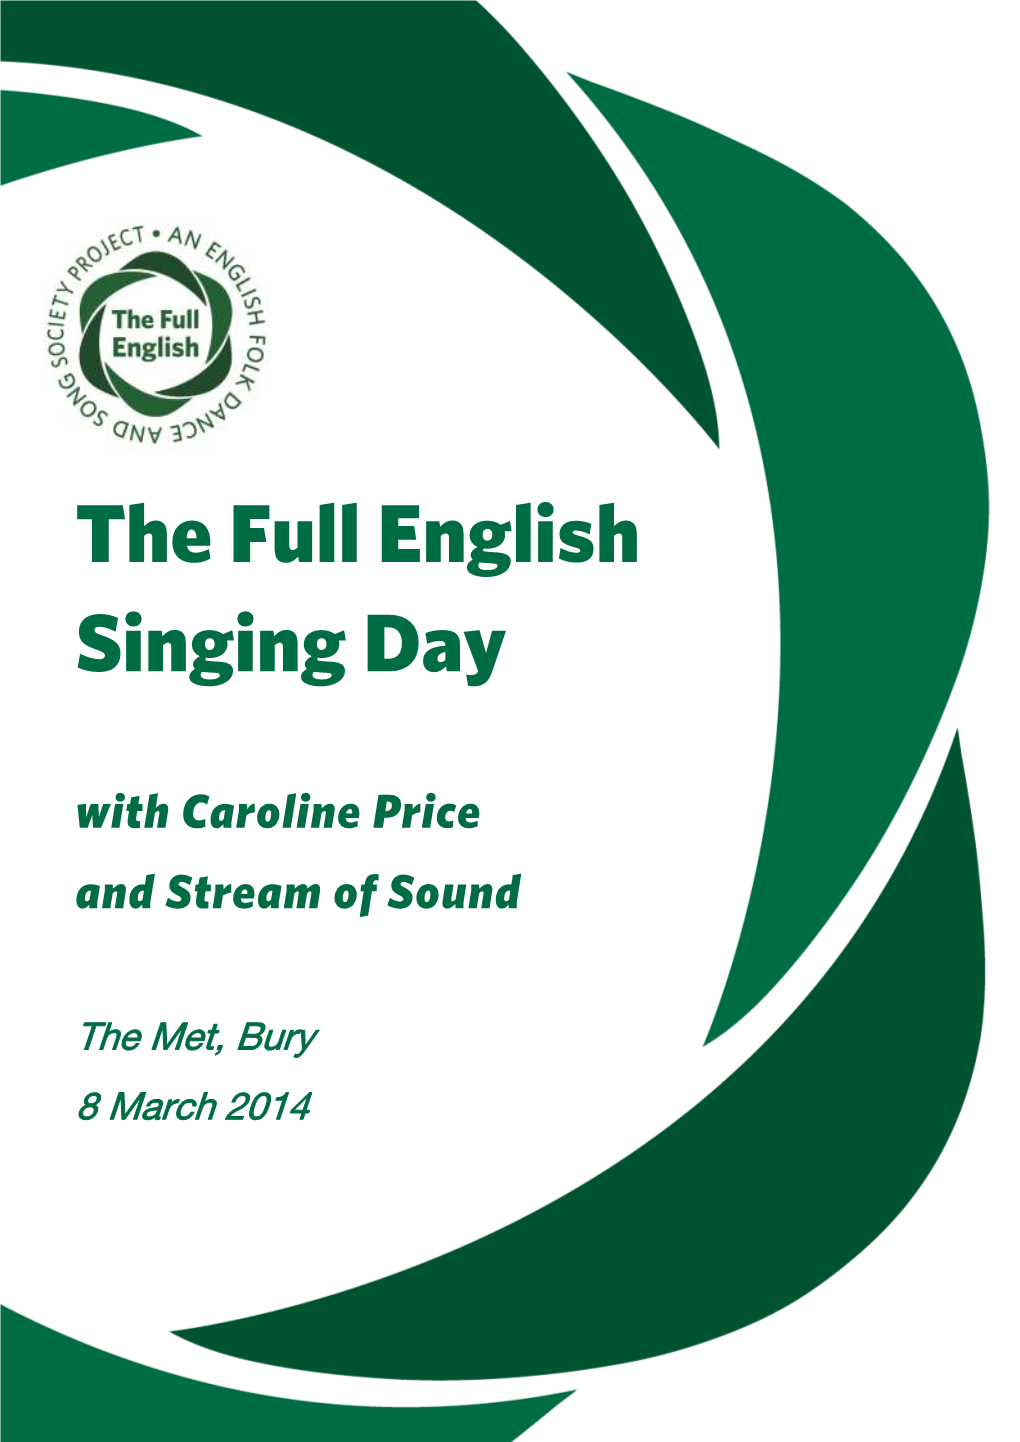 The Full English Singing Day with Caroline Price and Stream of Sound